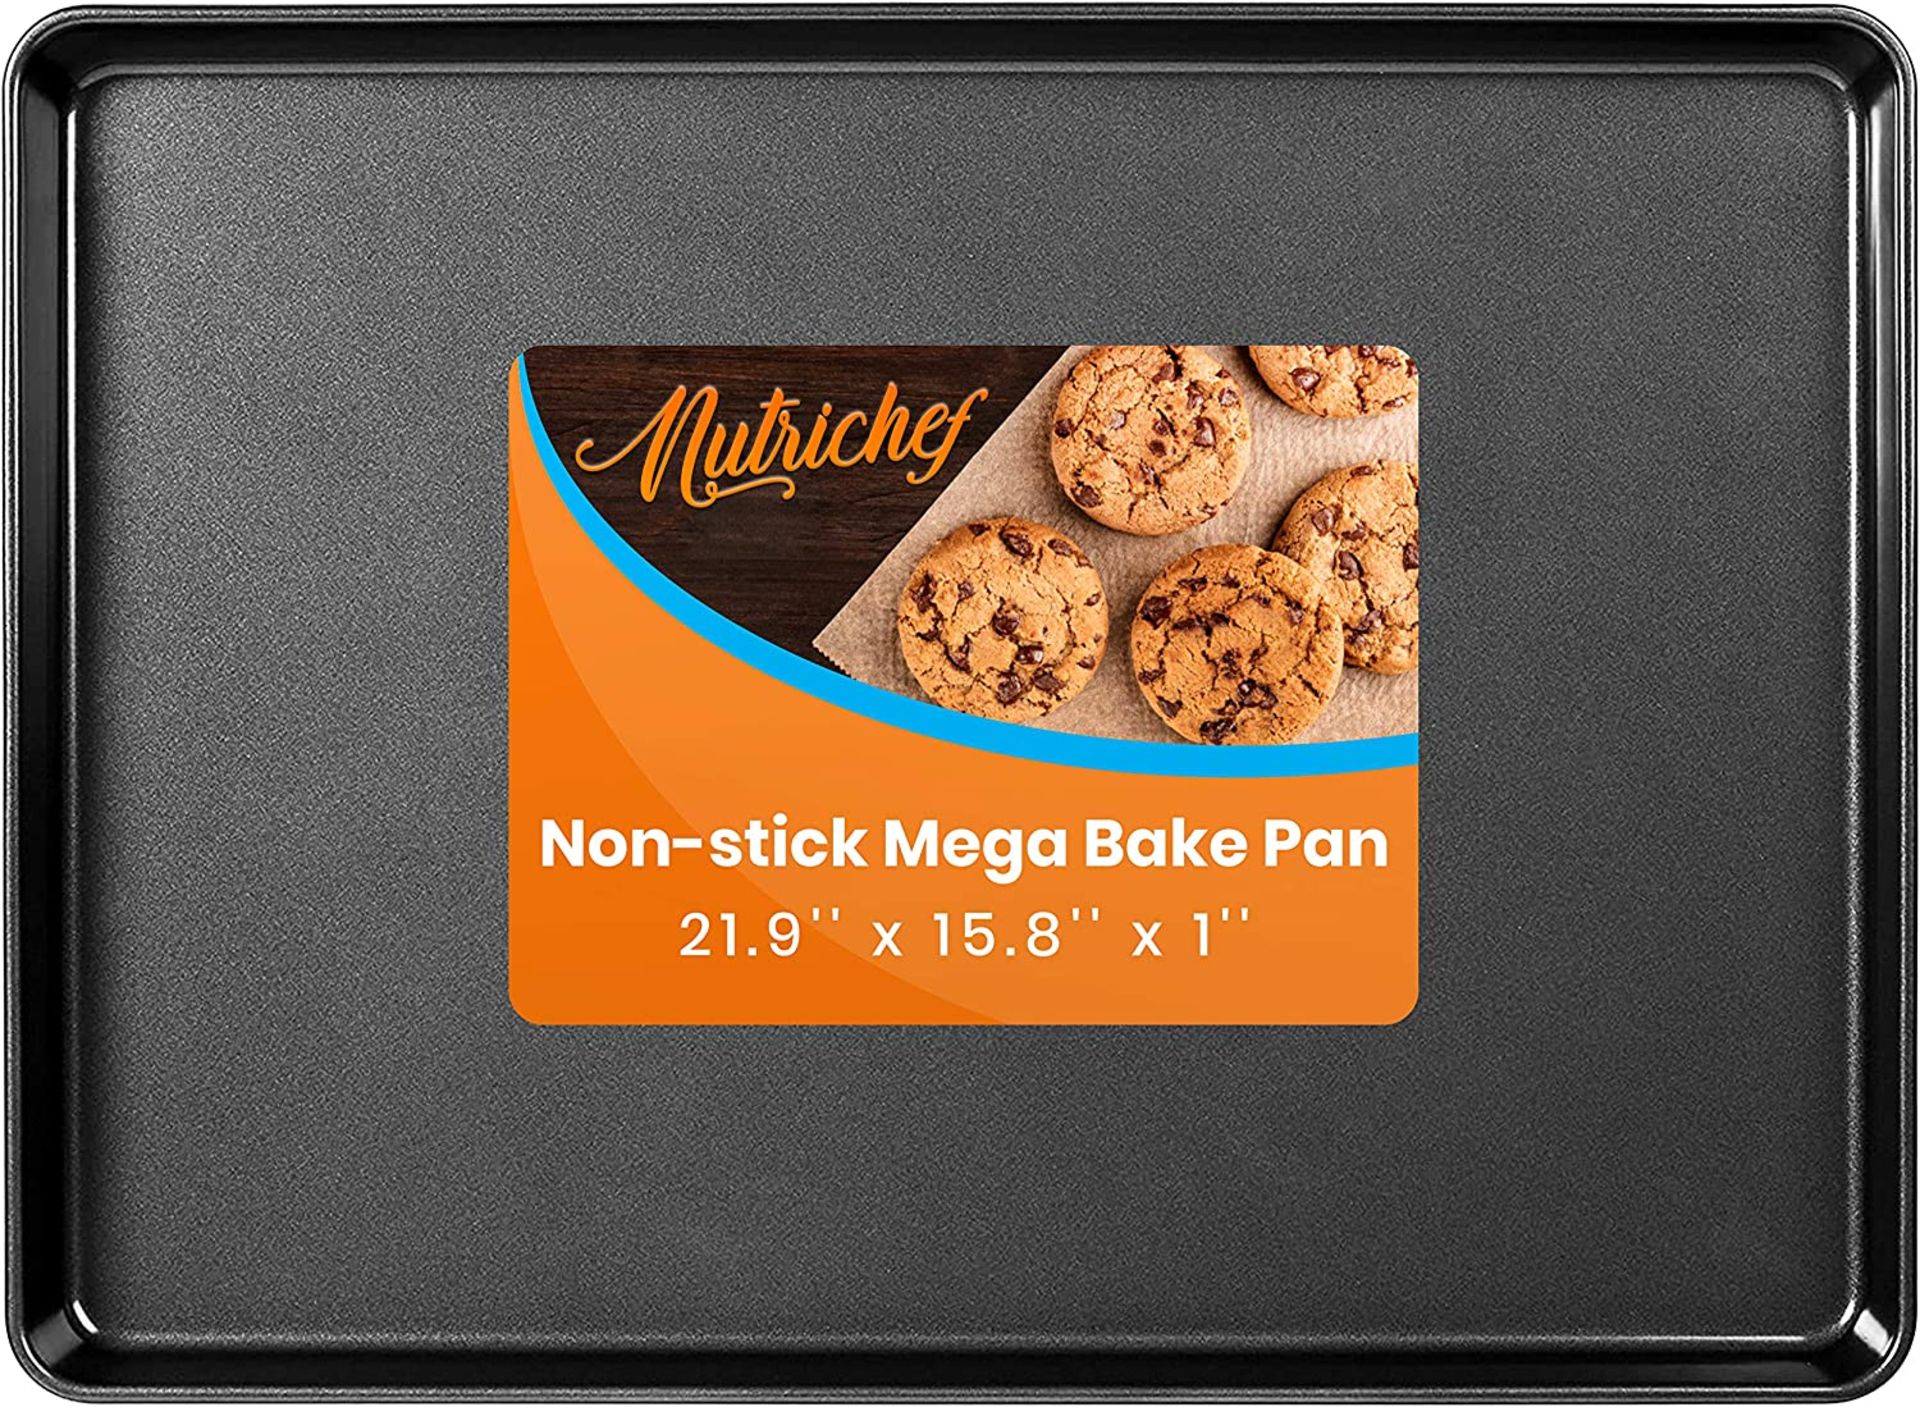 MEGA DEAL!!!! 144 X NEW NUTRICHEF NCLGBLK1 NONSTICK COOKIE SHEET BAKING TRAY MEGA PAN RRP £3888